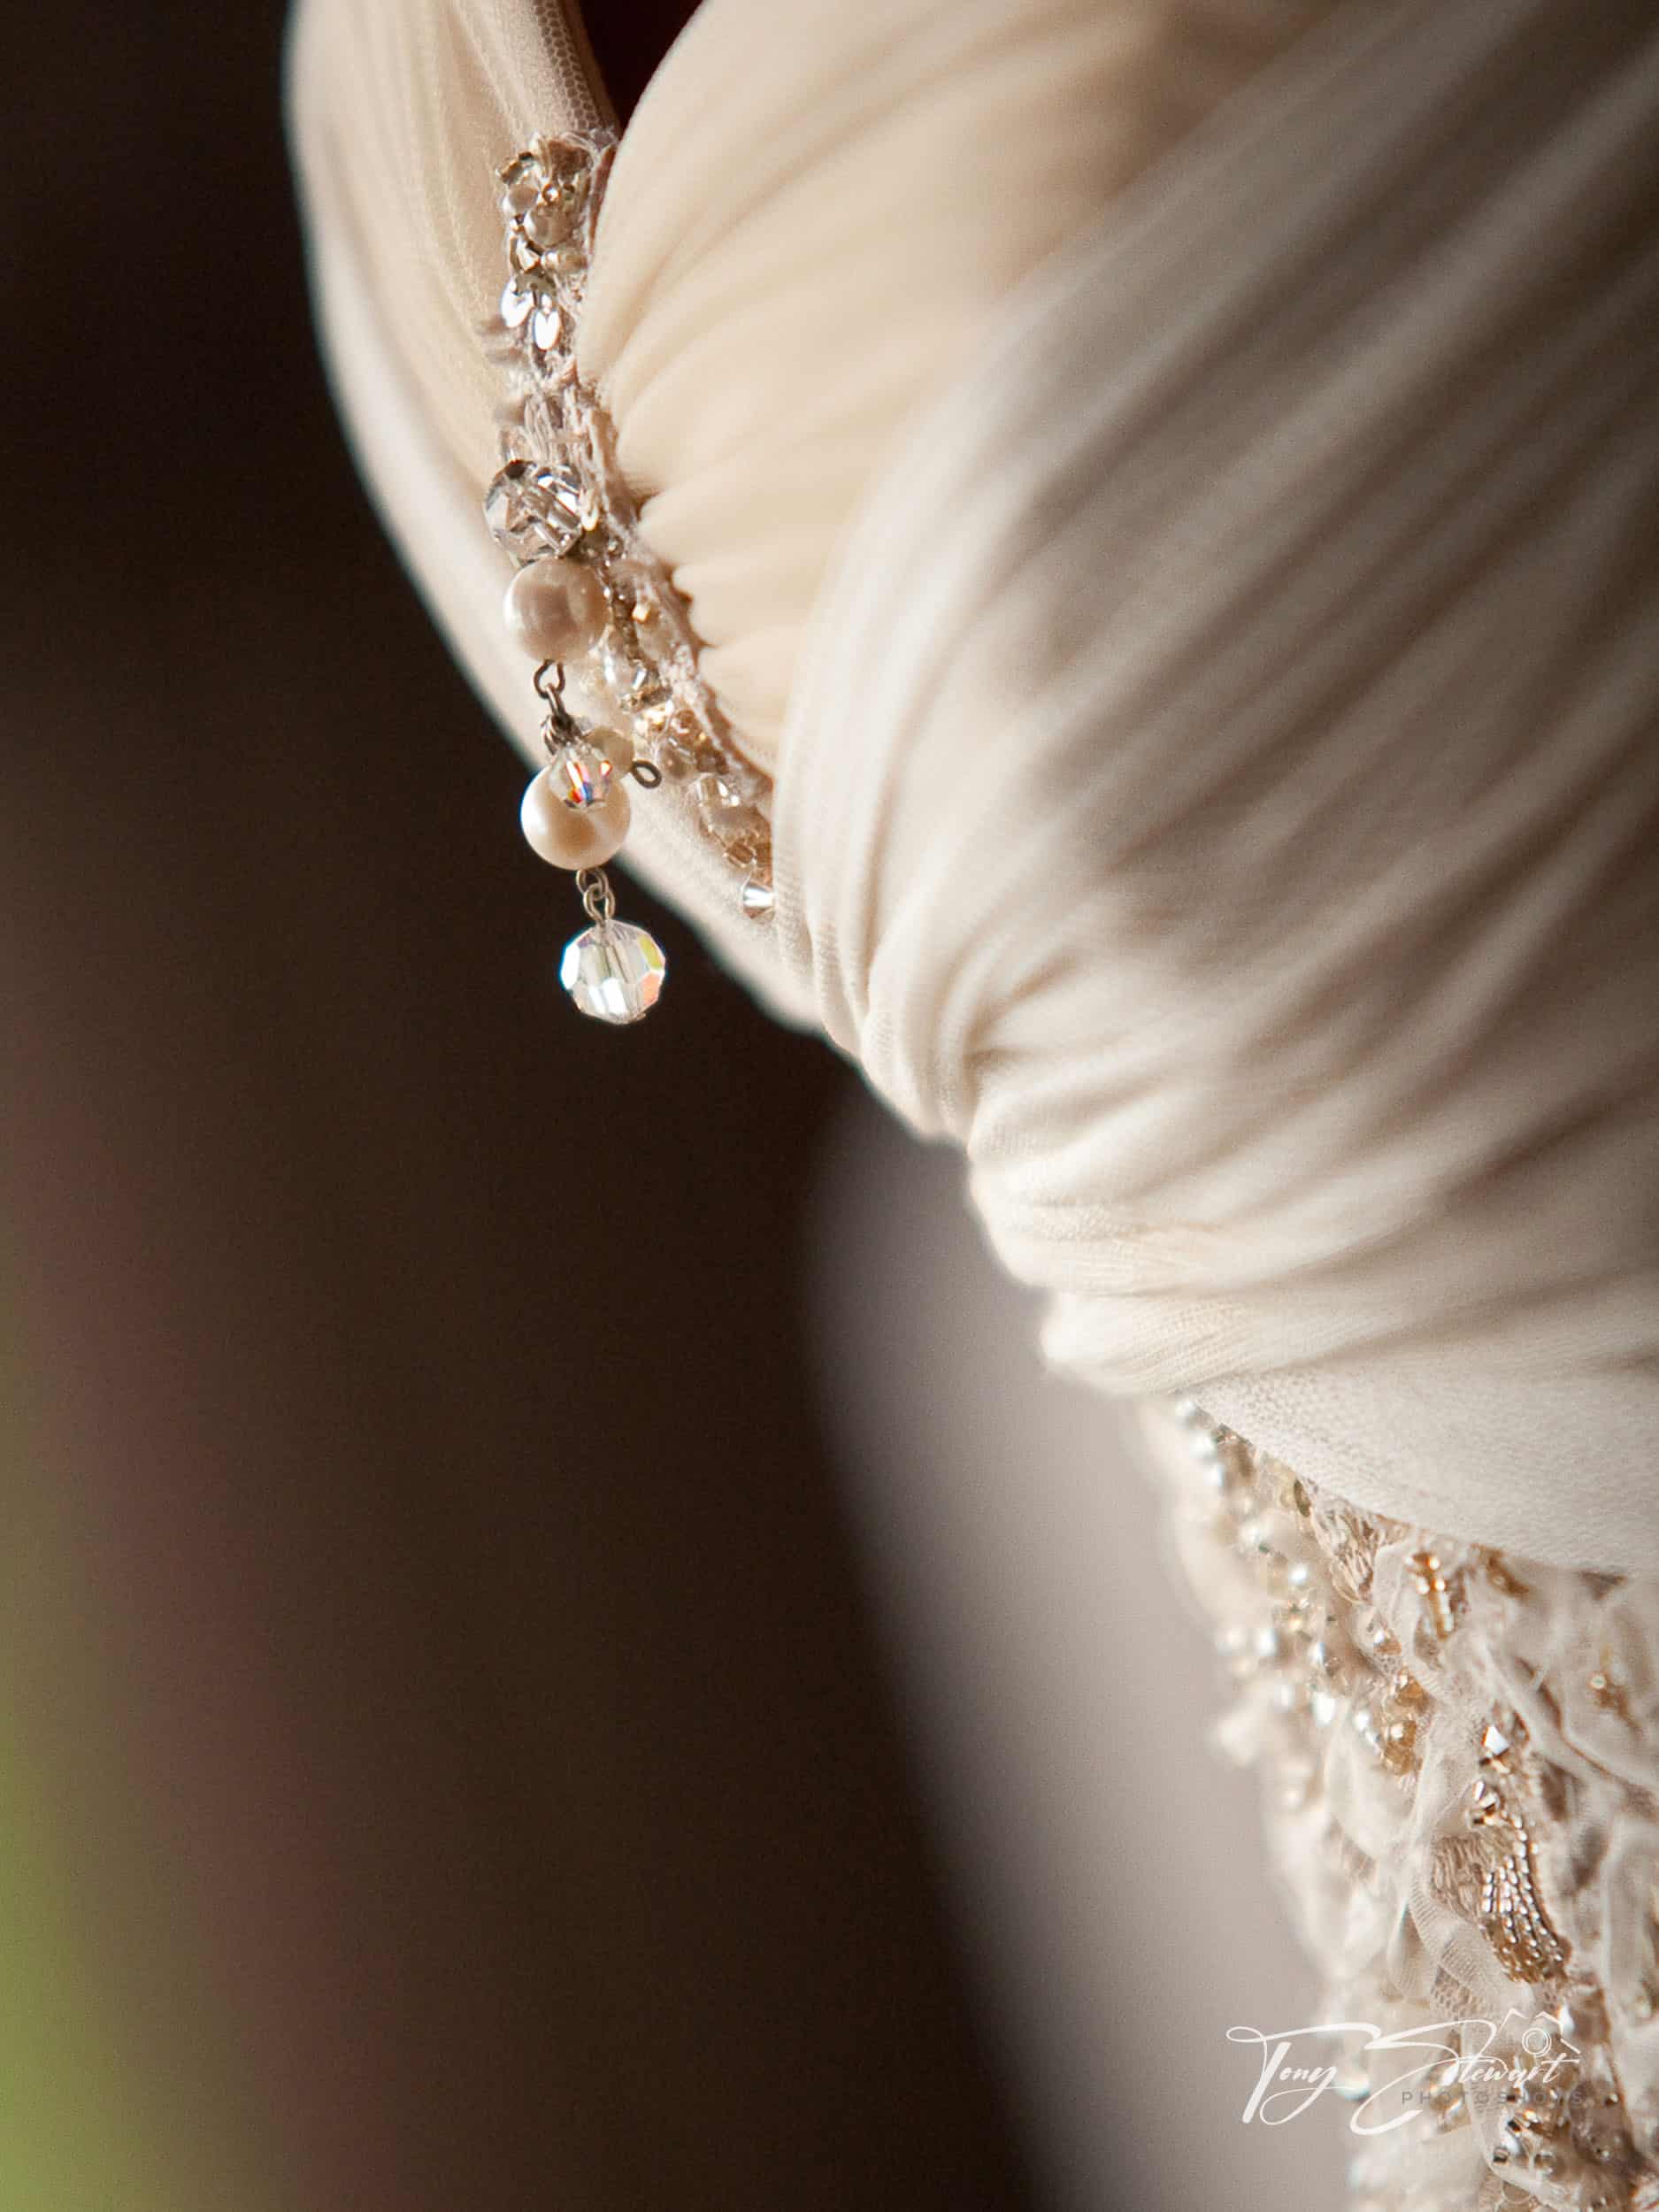 Bridal dress detail showing pearls, intricate fabric folds and lacework.